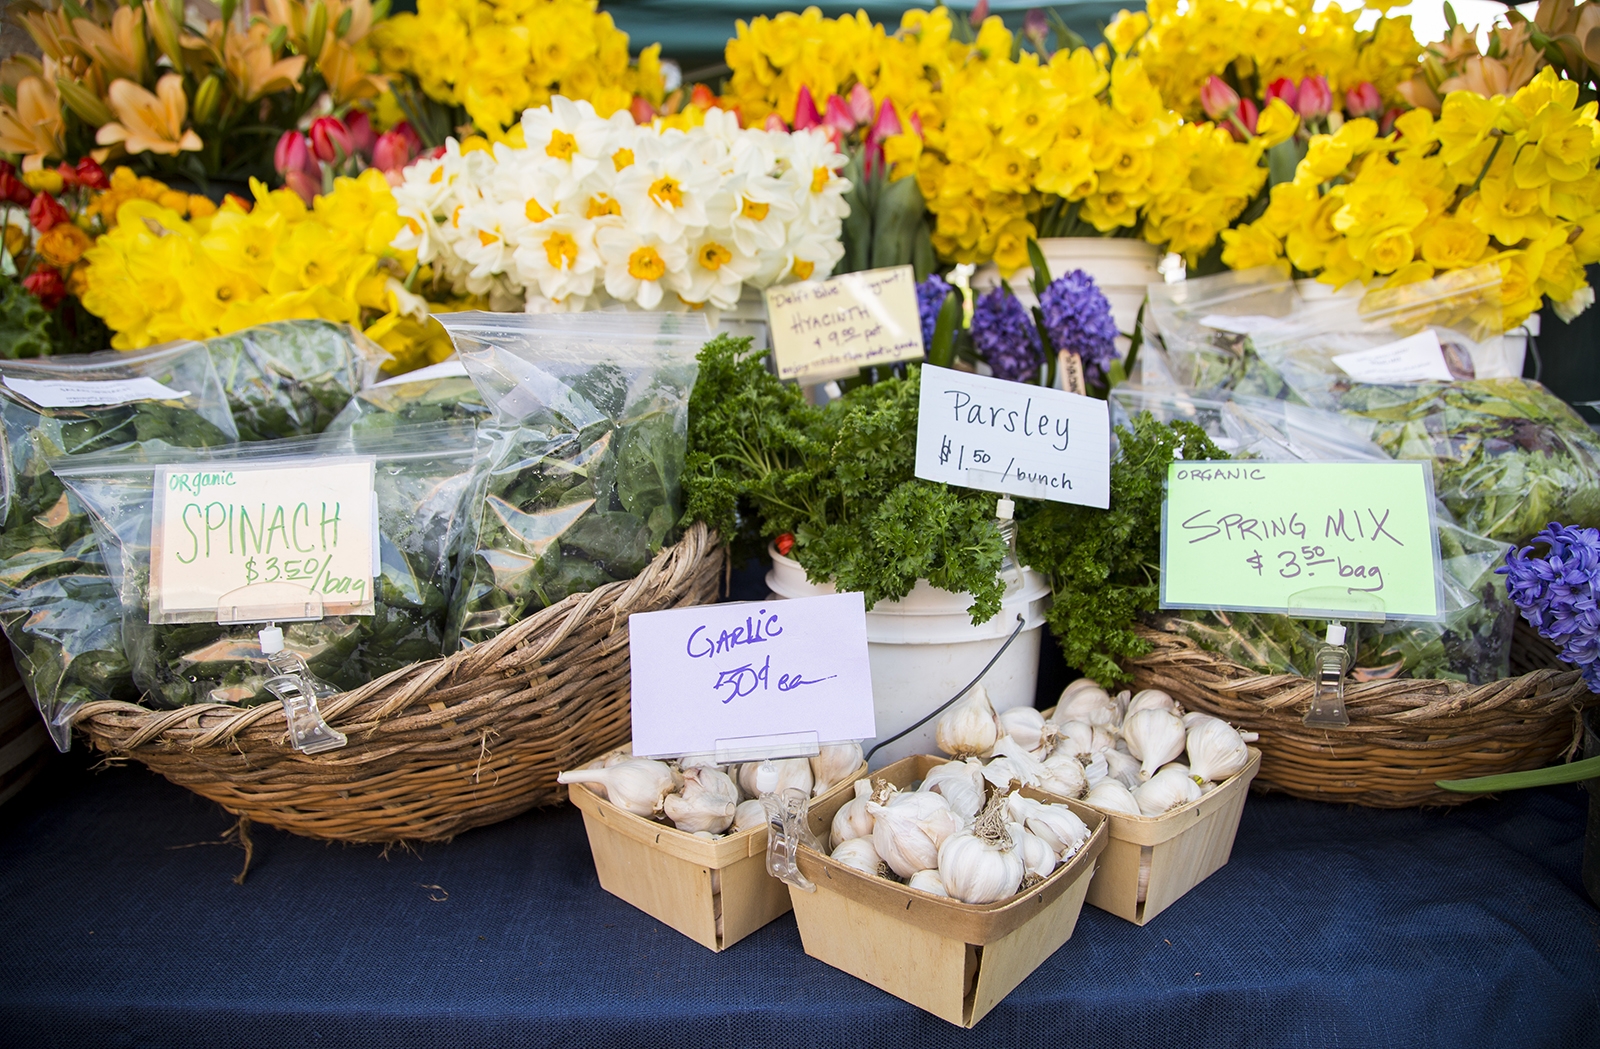 A display of flower and herbs at a farmer's market in Fayetteville, Arkansas.